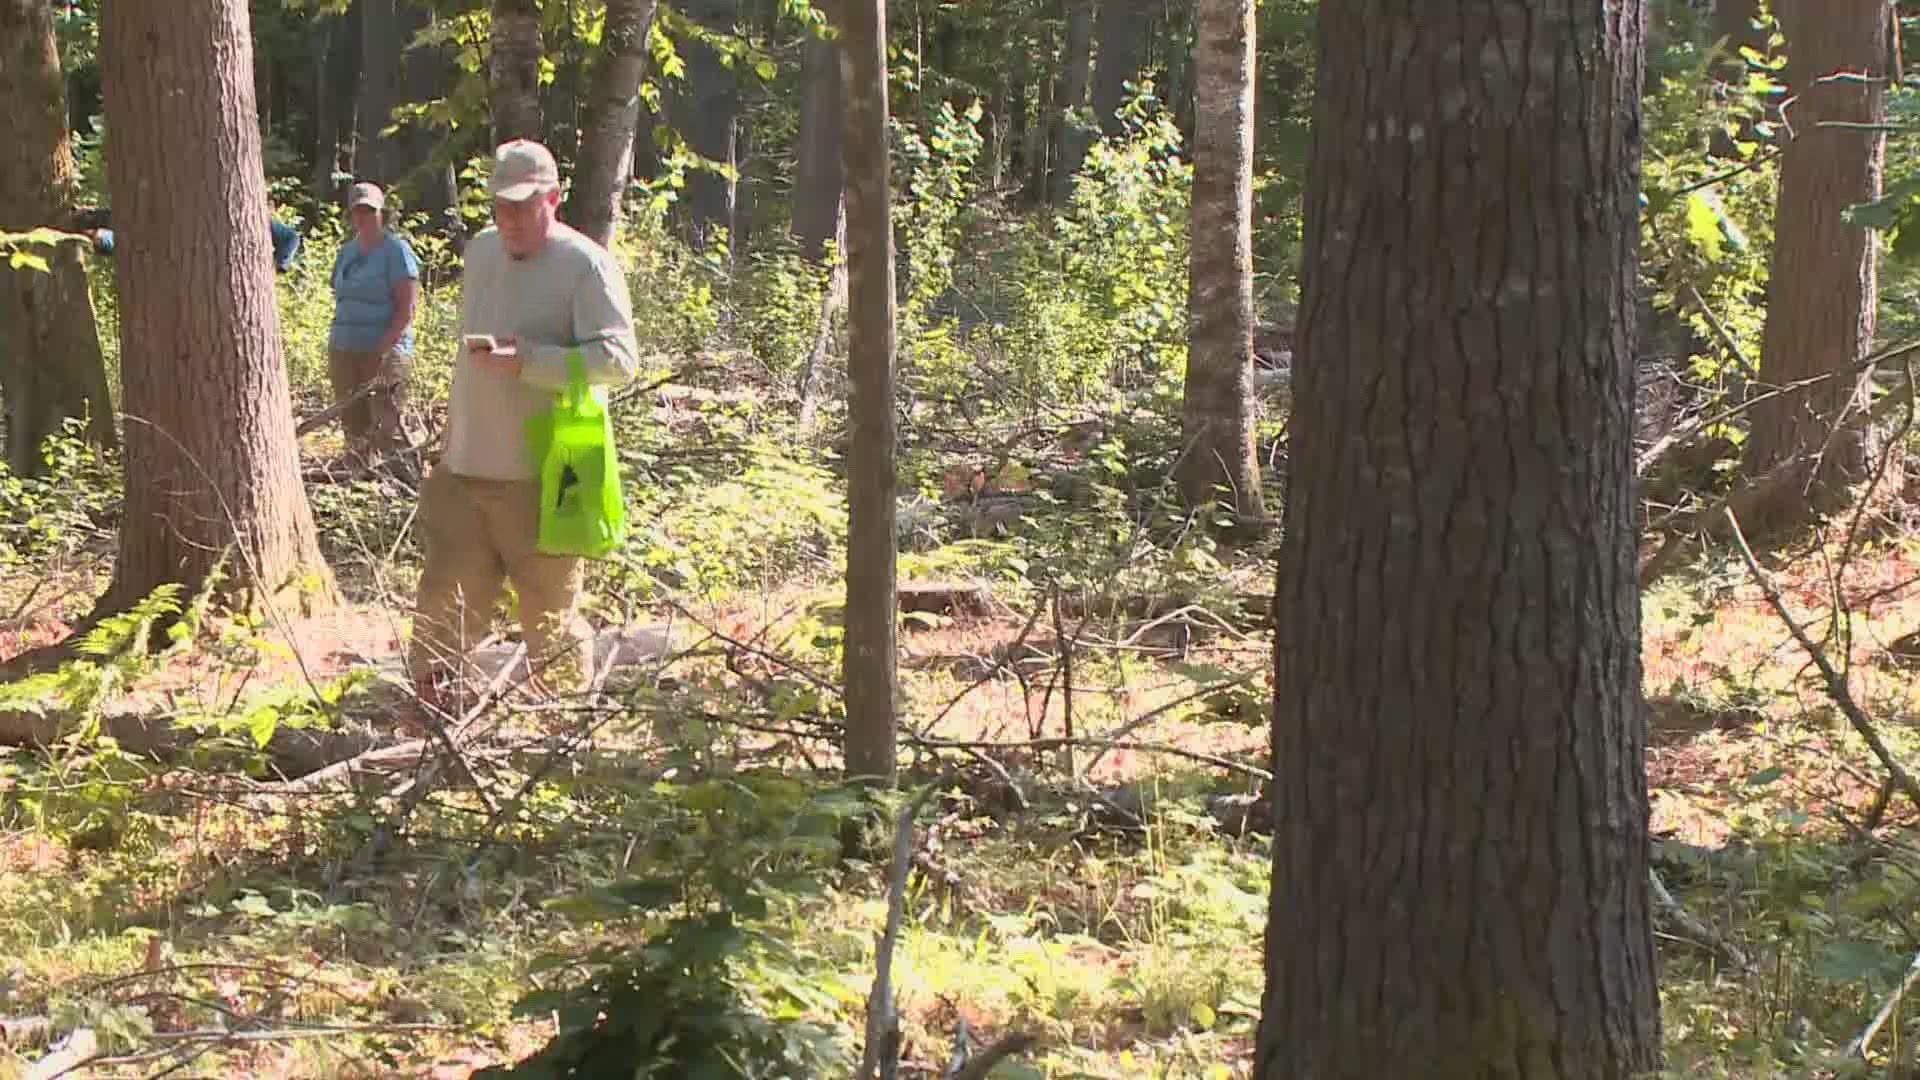 The University of Maine has recruited 200 forest land owners to help scientists gather tick population data across Maine.